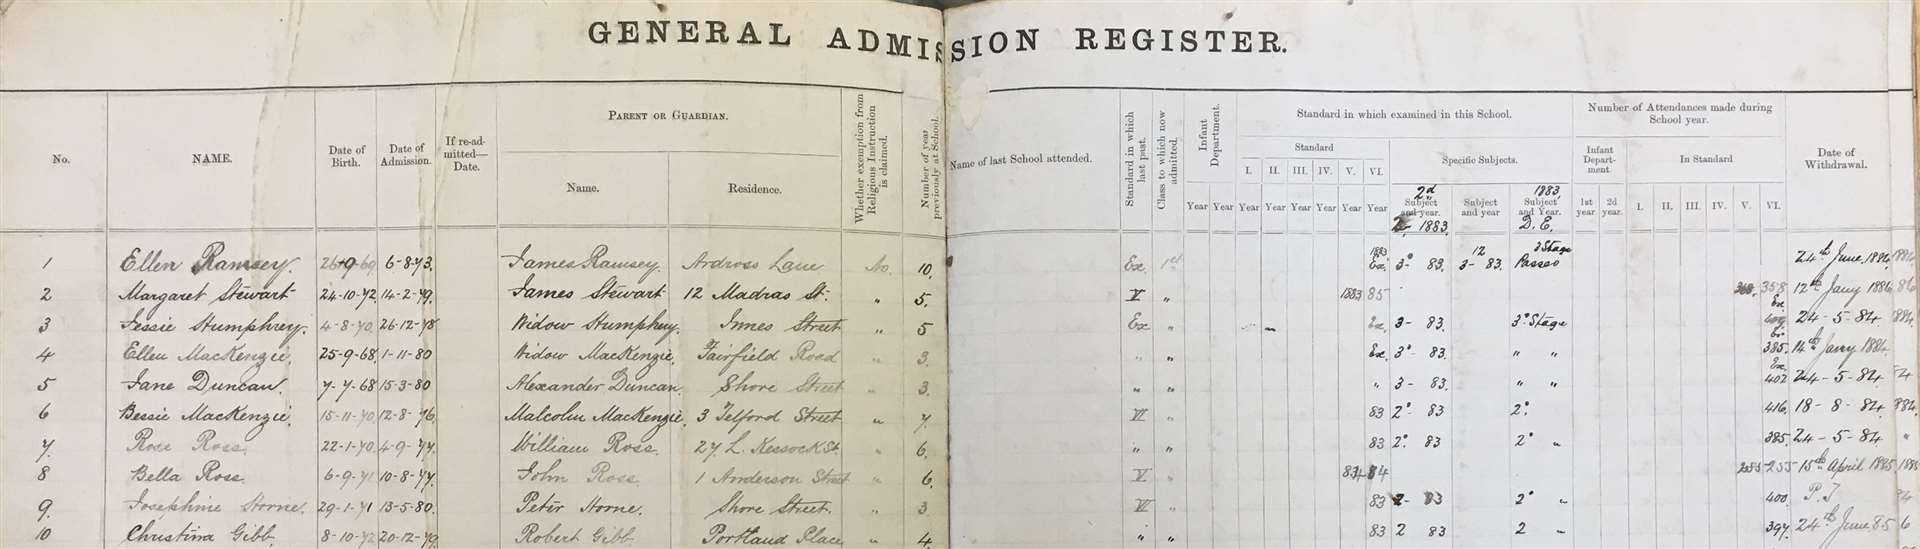 The admission register from Merkinch School in 1873.